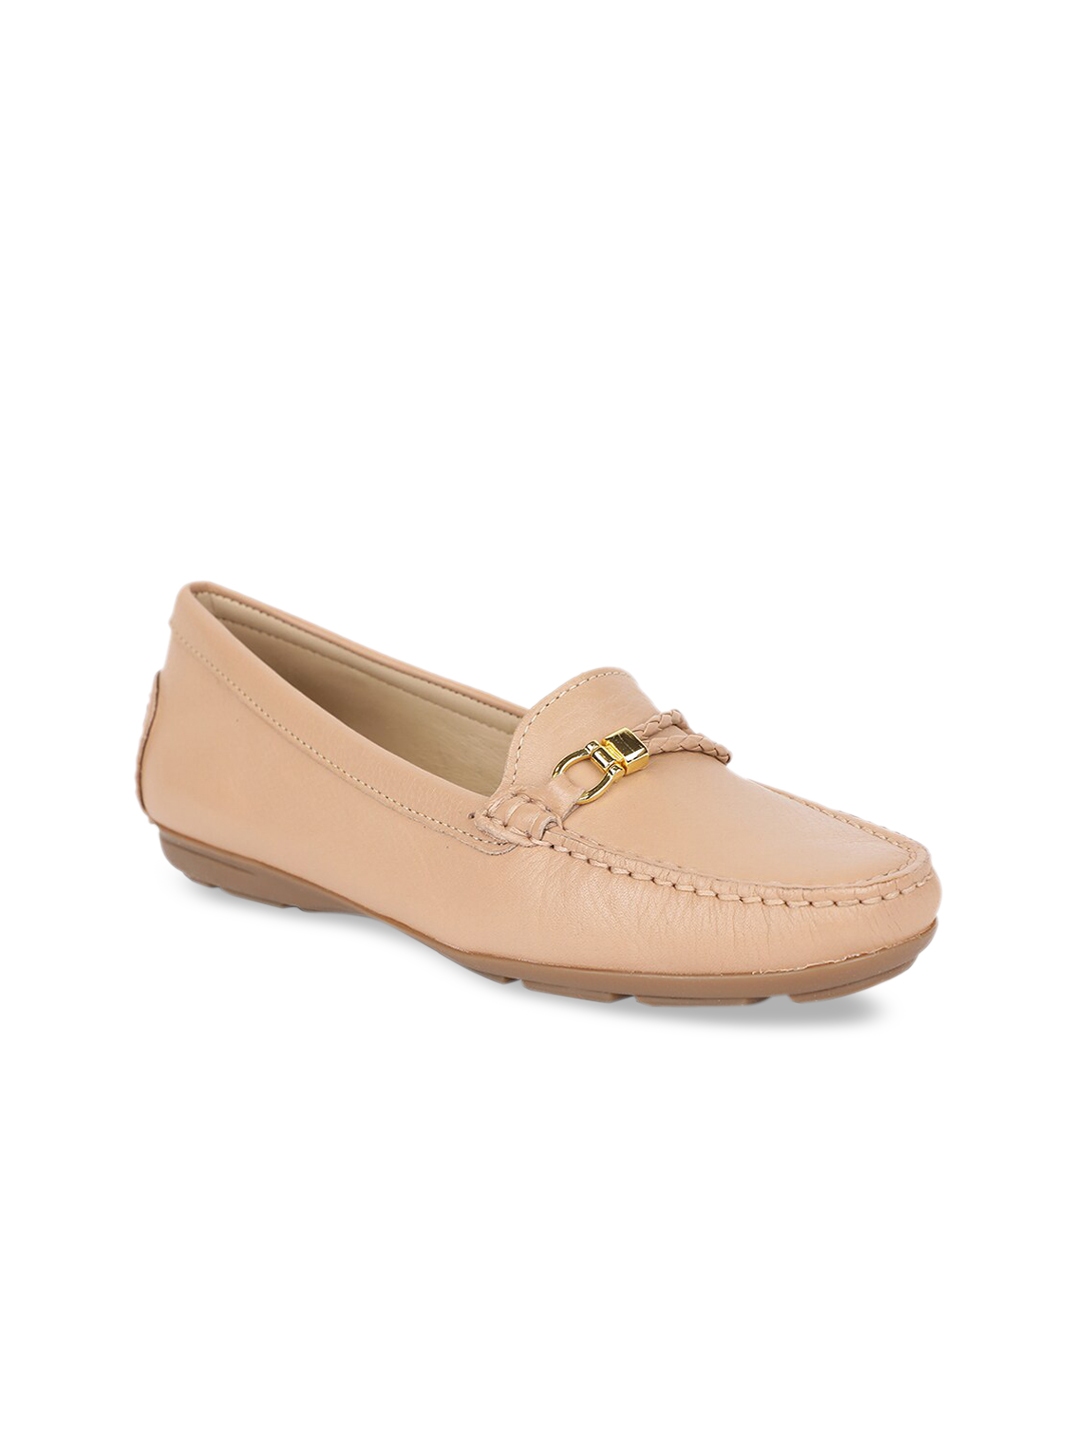 Buy Hush Puppies Women Beige Leather Loafers - Casual Shoes for Women ...